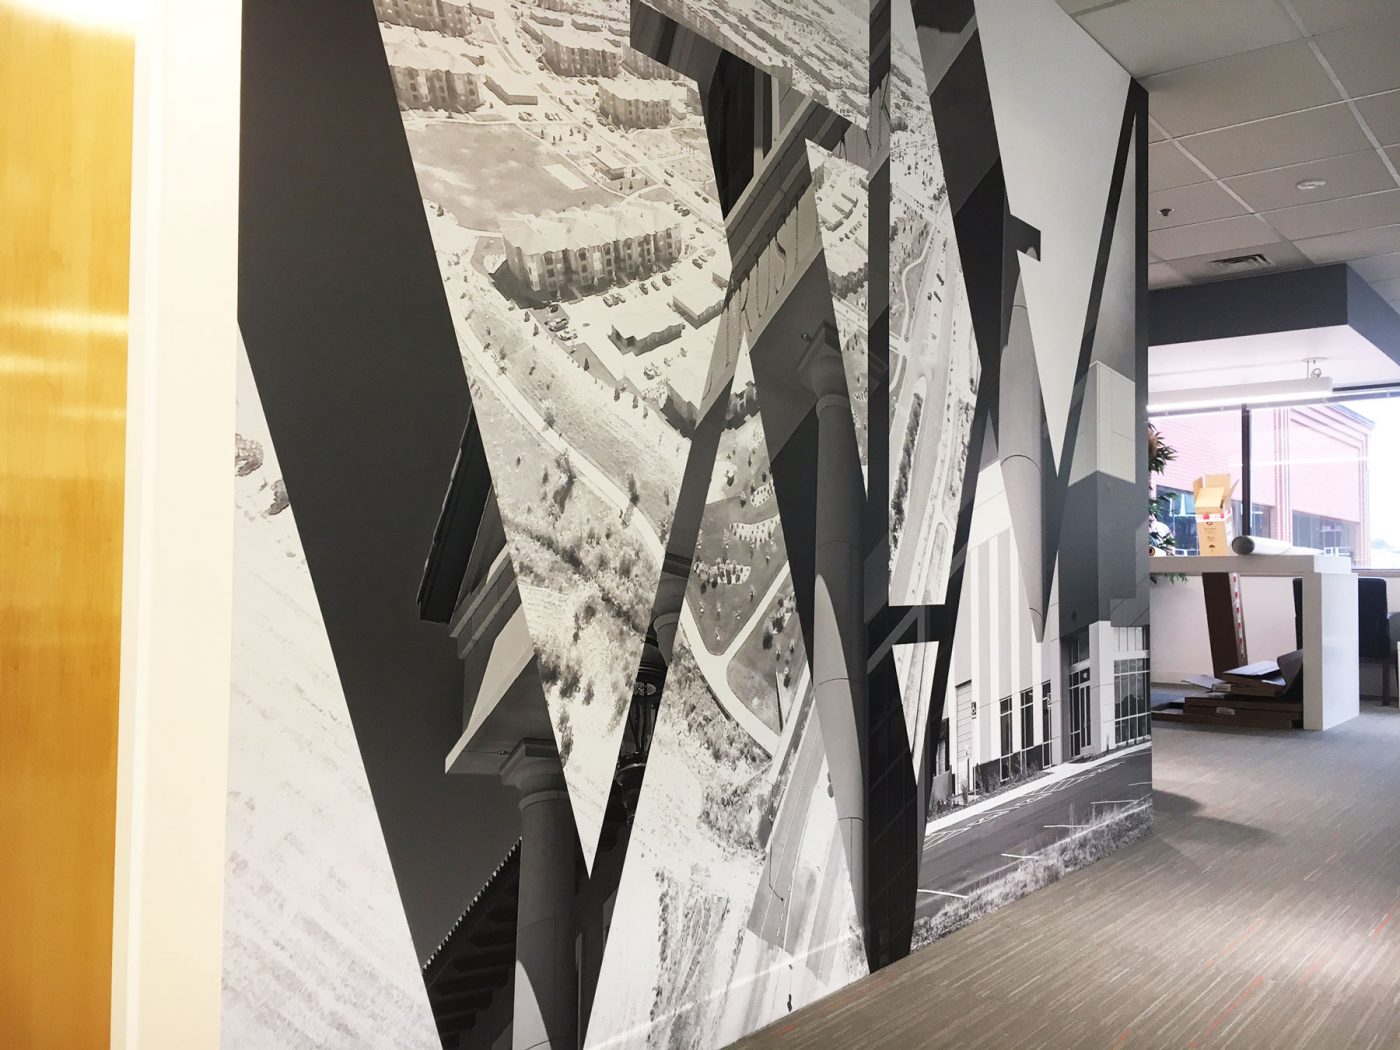 wm 1 - Reinforce Brand Identity with an Office Wall Mural